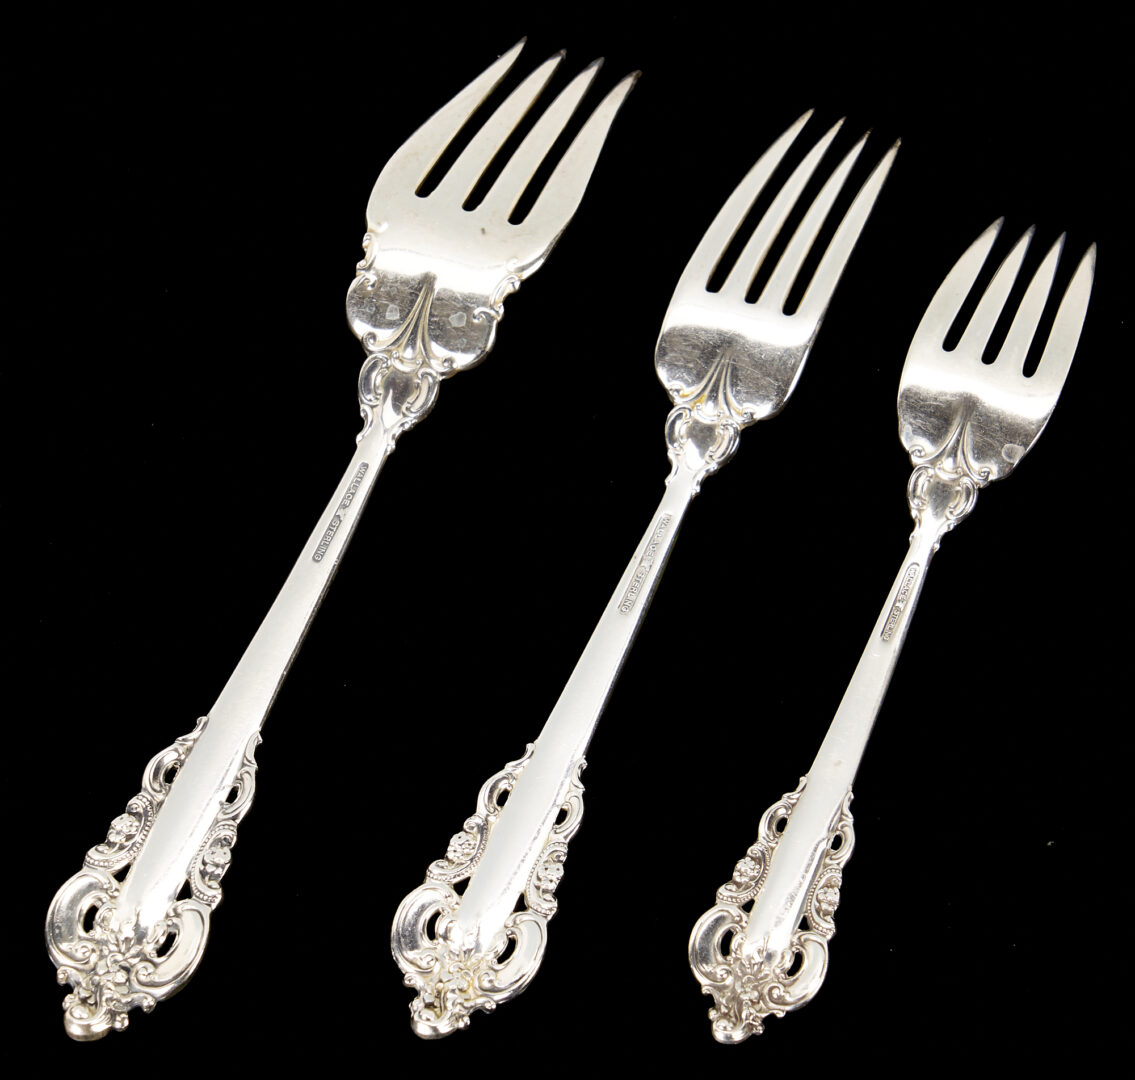 Lot 54: 119 pcs Wallace Grand Baroque Sterling Flatware, Service for 16 & 1 Extra